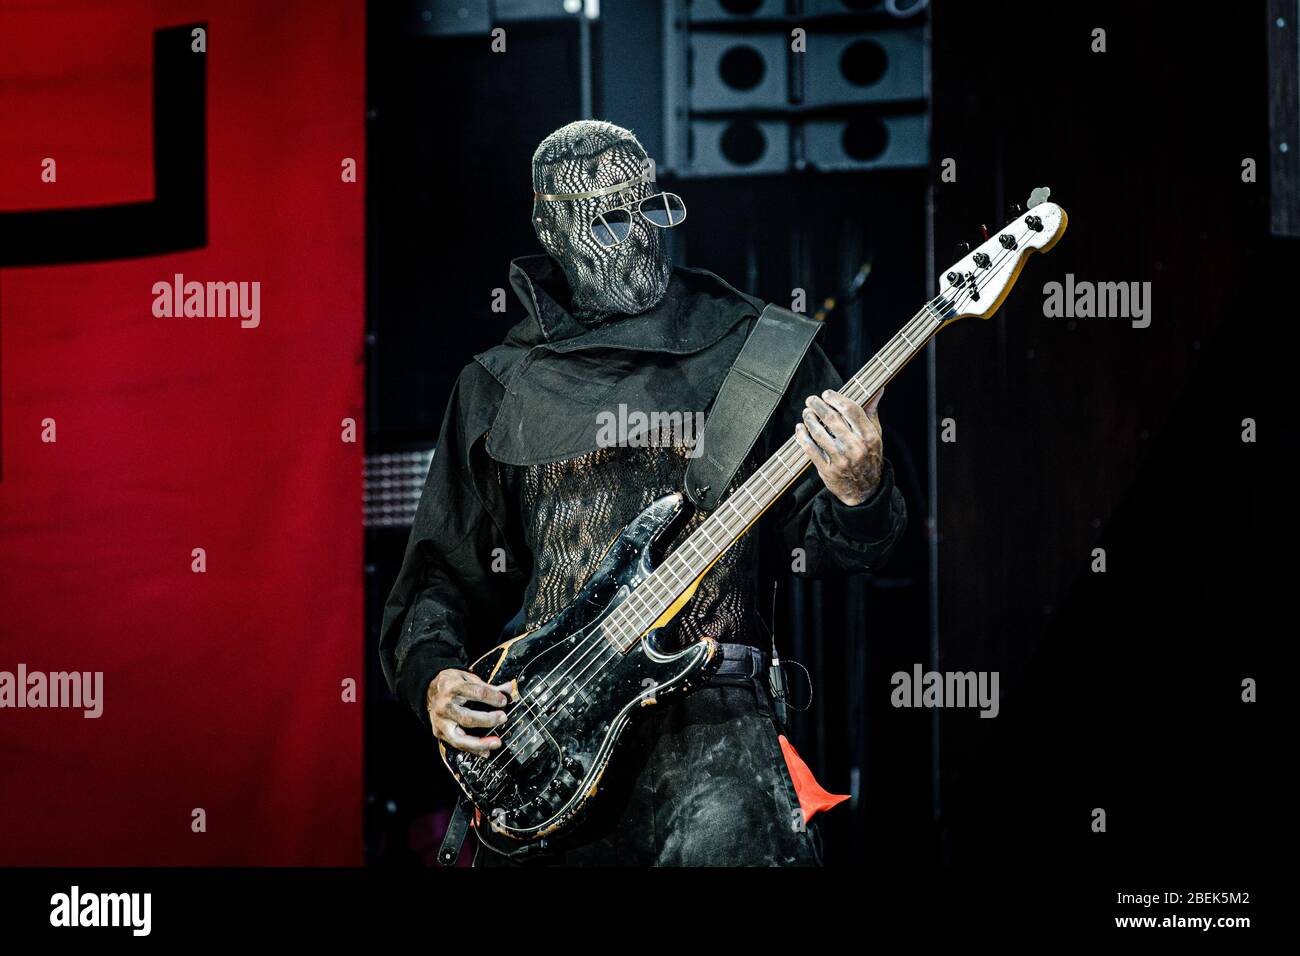 Copenhagen, Denmark. 19th, June 2019. Rammstein, the German industrial metal band, performs a live concert at Telia Parekn in Copenhagen. Here bass player Oliver Riedel is seen live on stage. (Photo credit: Gonzales Photo - Thomas Rungstrom). Stock Photo